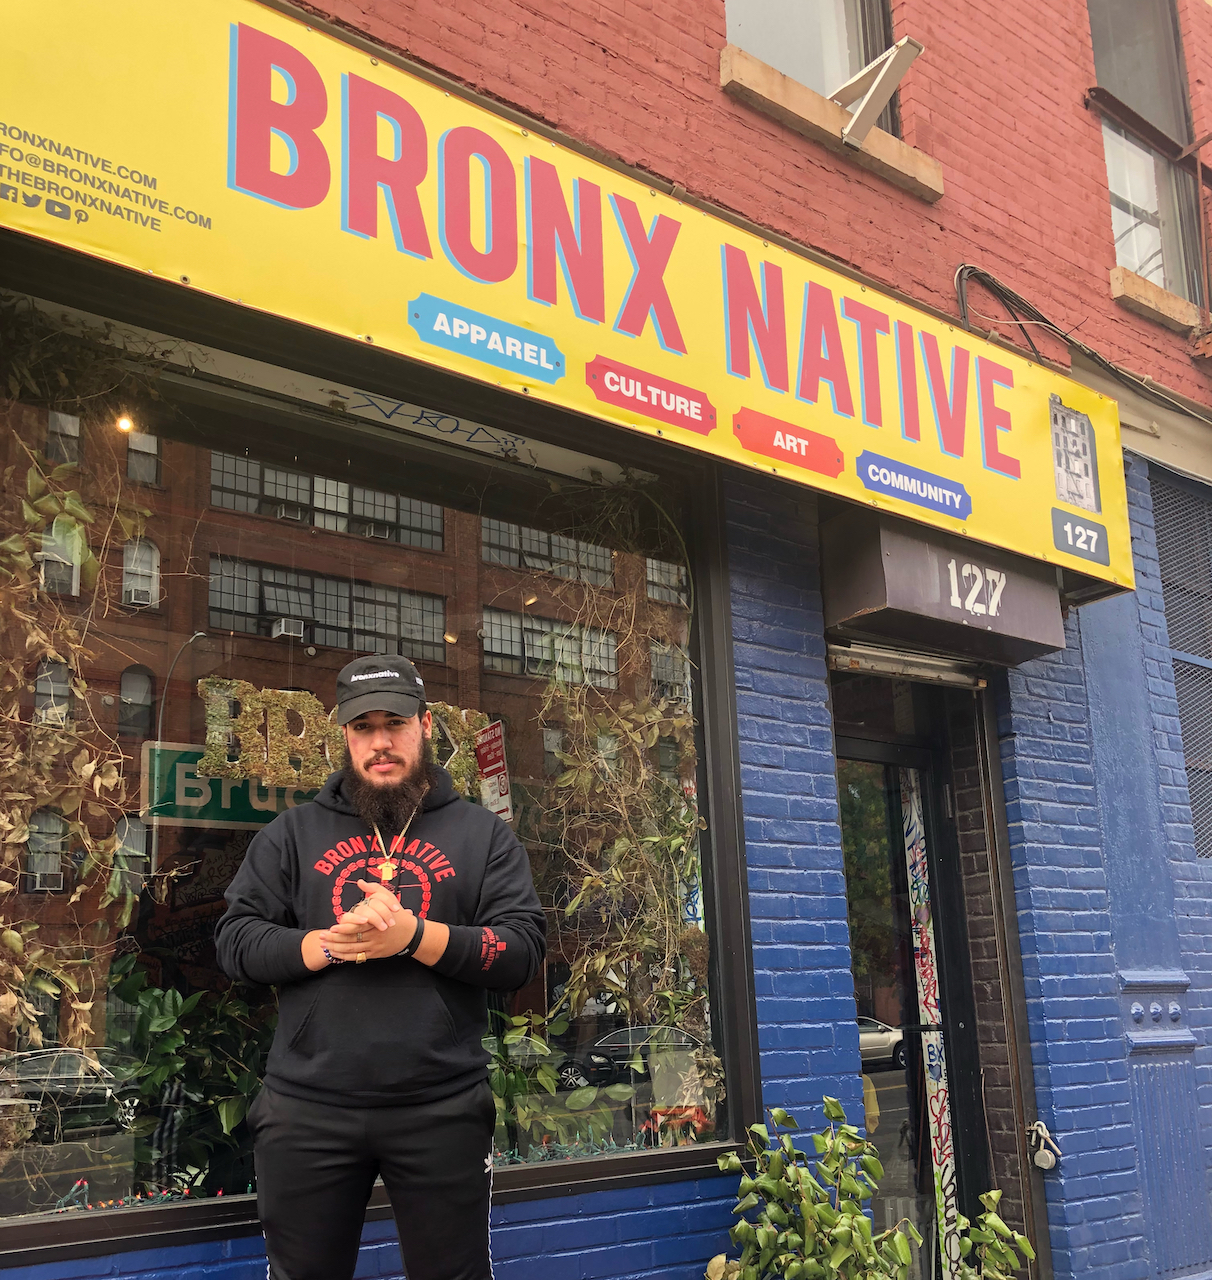 Bronx Native offers Mott Haven much more than clothes